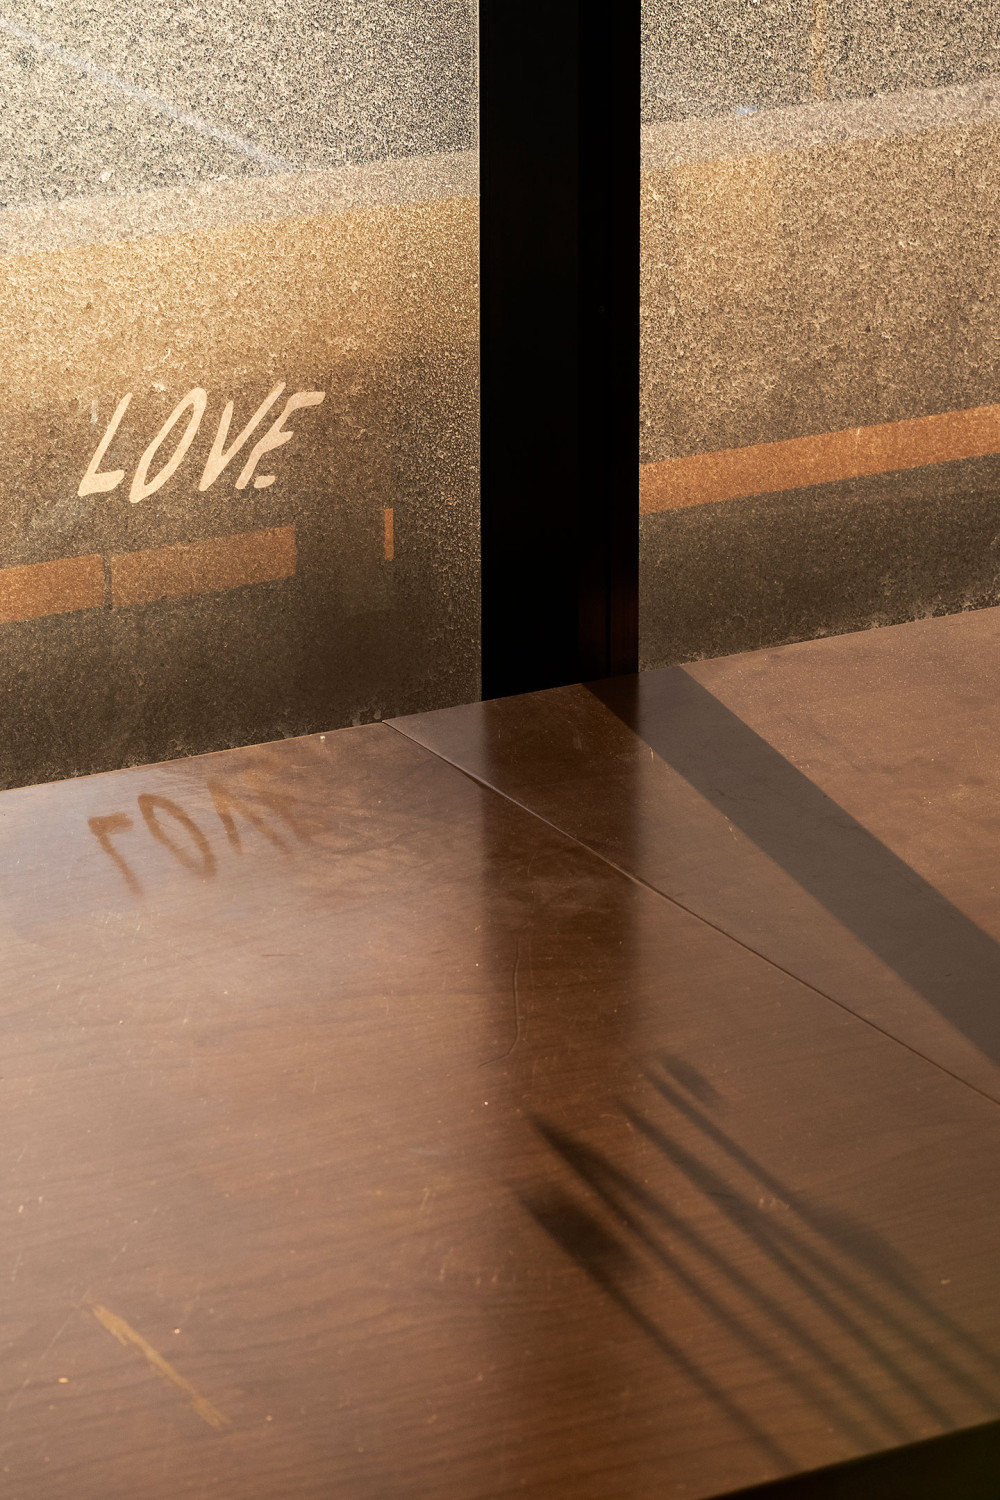 A photo of a window in the Cool Change office. A sticker is stuck to the screen, depicting the letters "L, O, V, E". The light, pouring through the window casts shadows of the letters onto the desk in front of it.